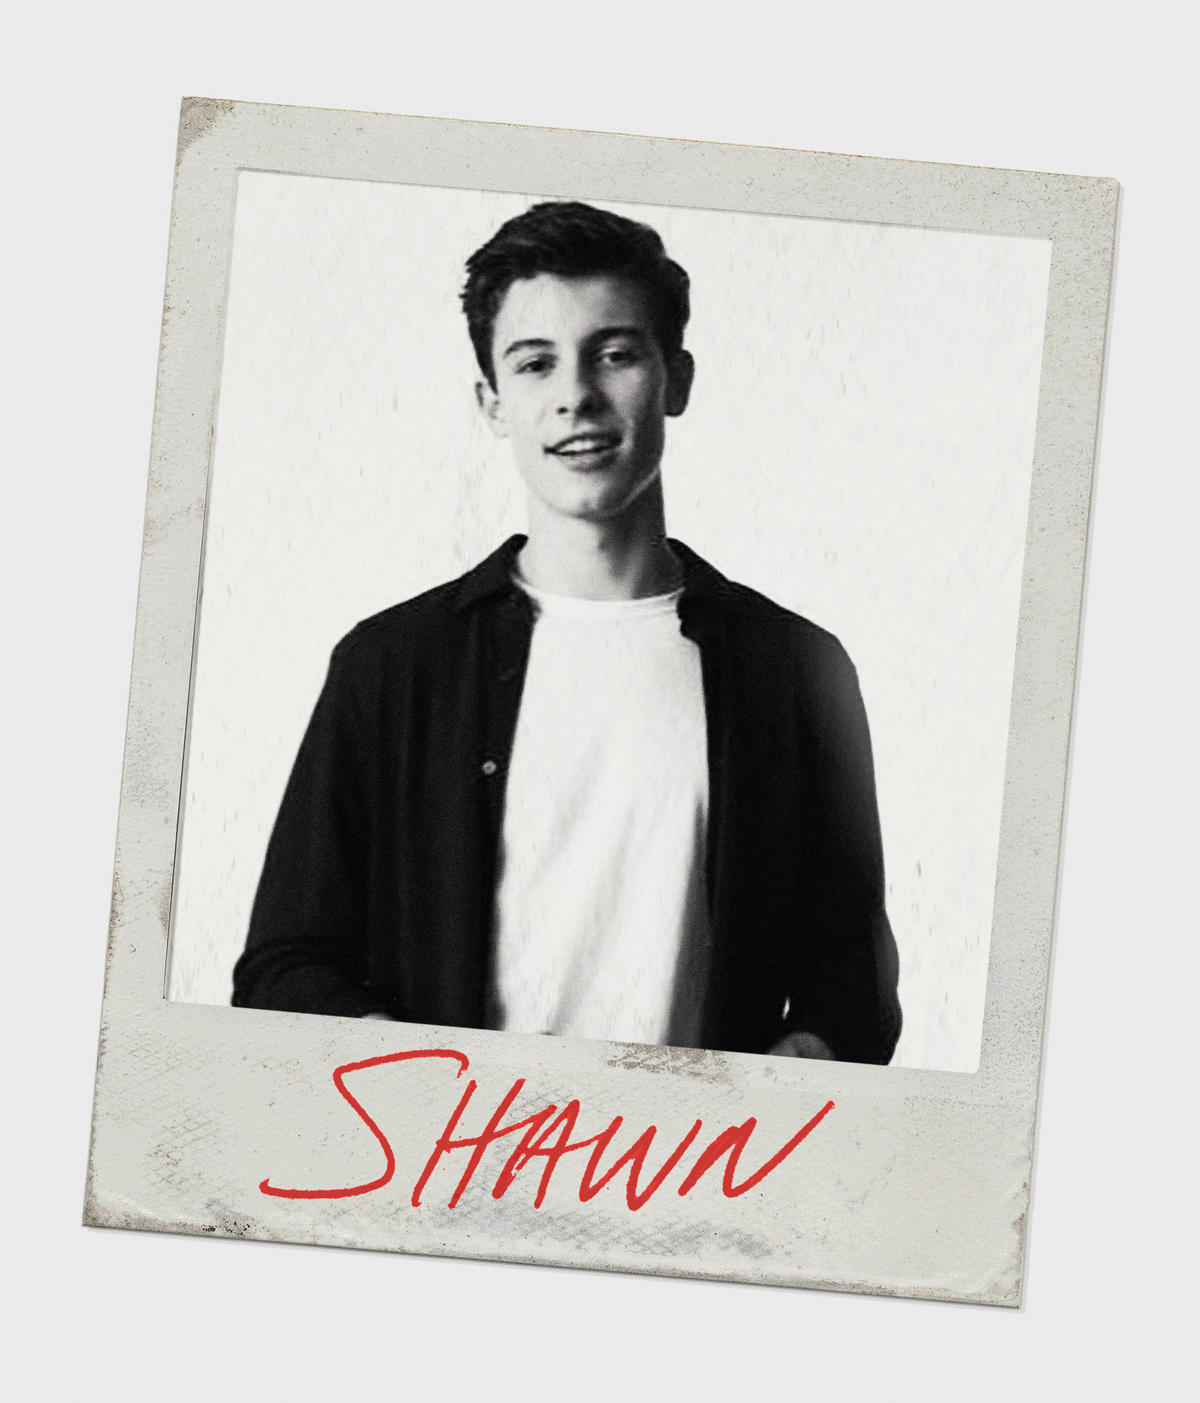 A photo of shawn with his name on it - Shawn Mendes